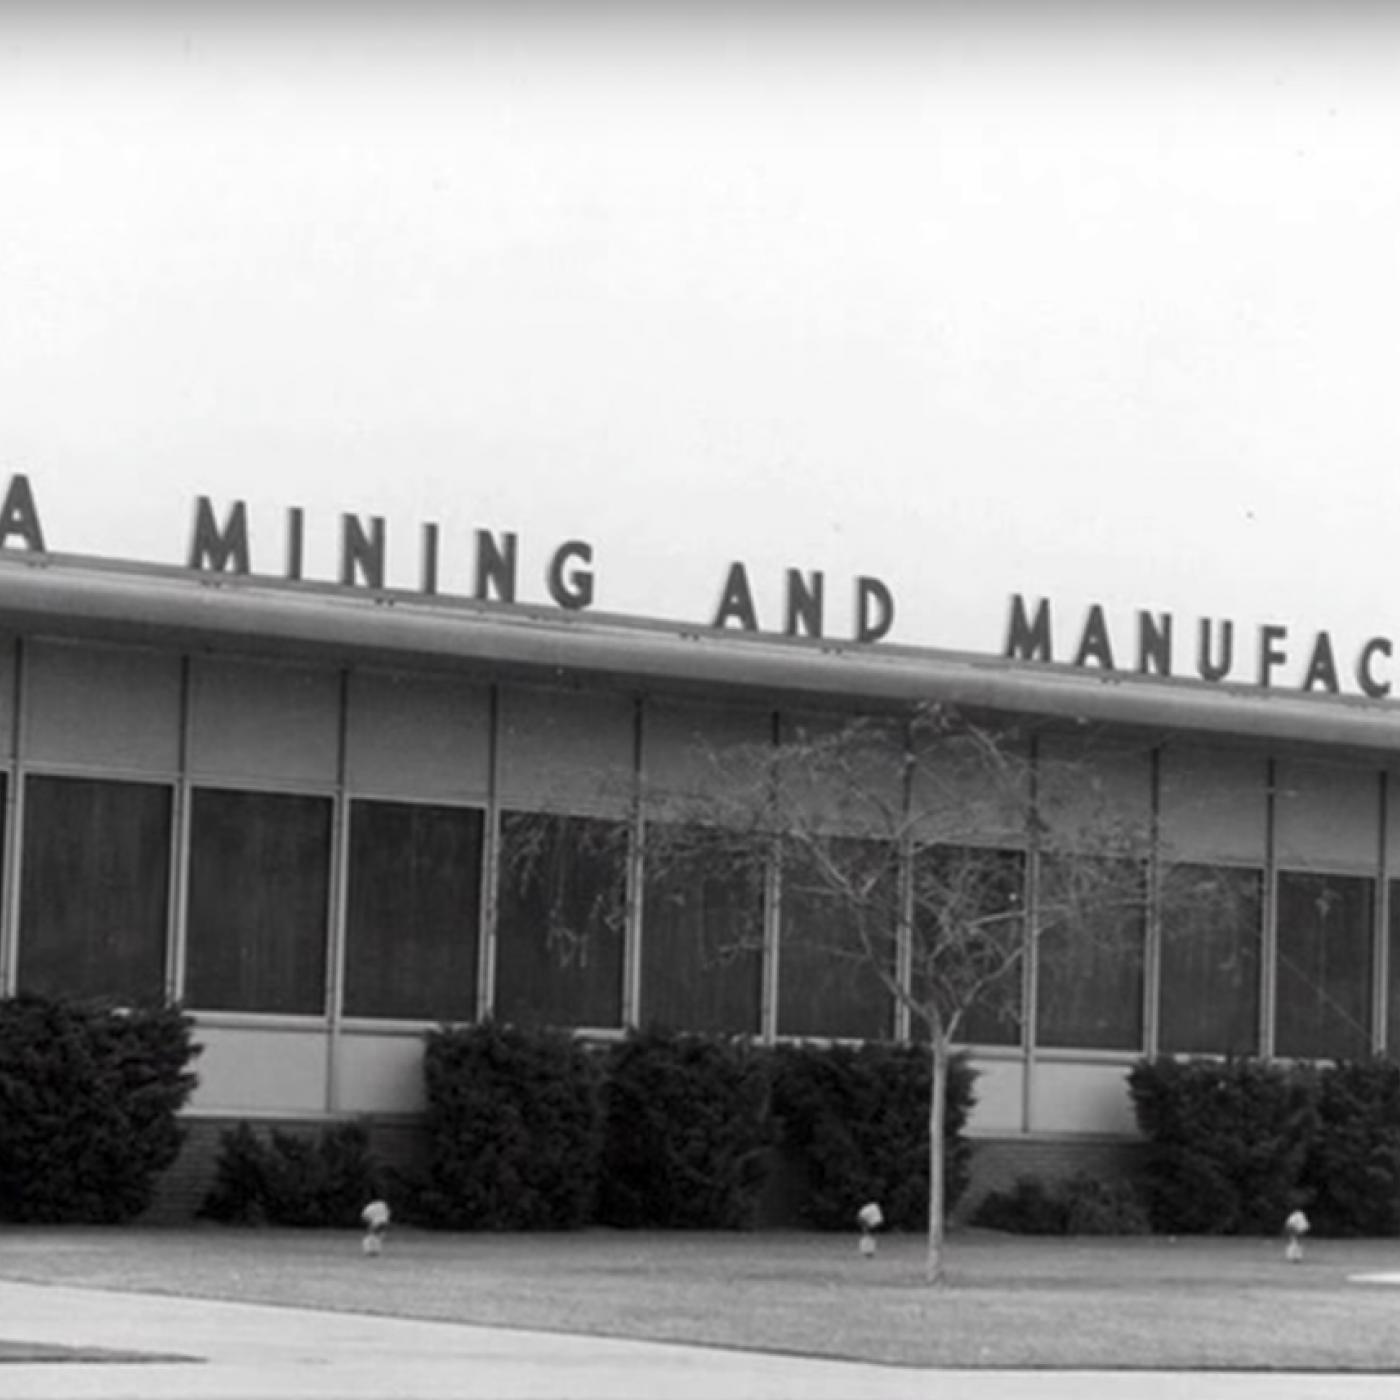 Minnesota Mining and Manufacturing